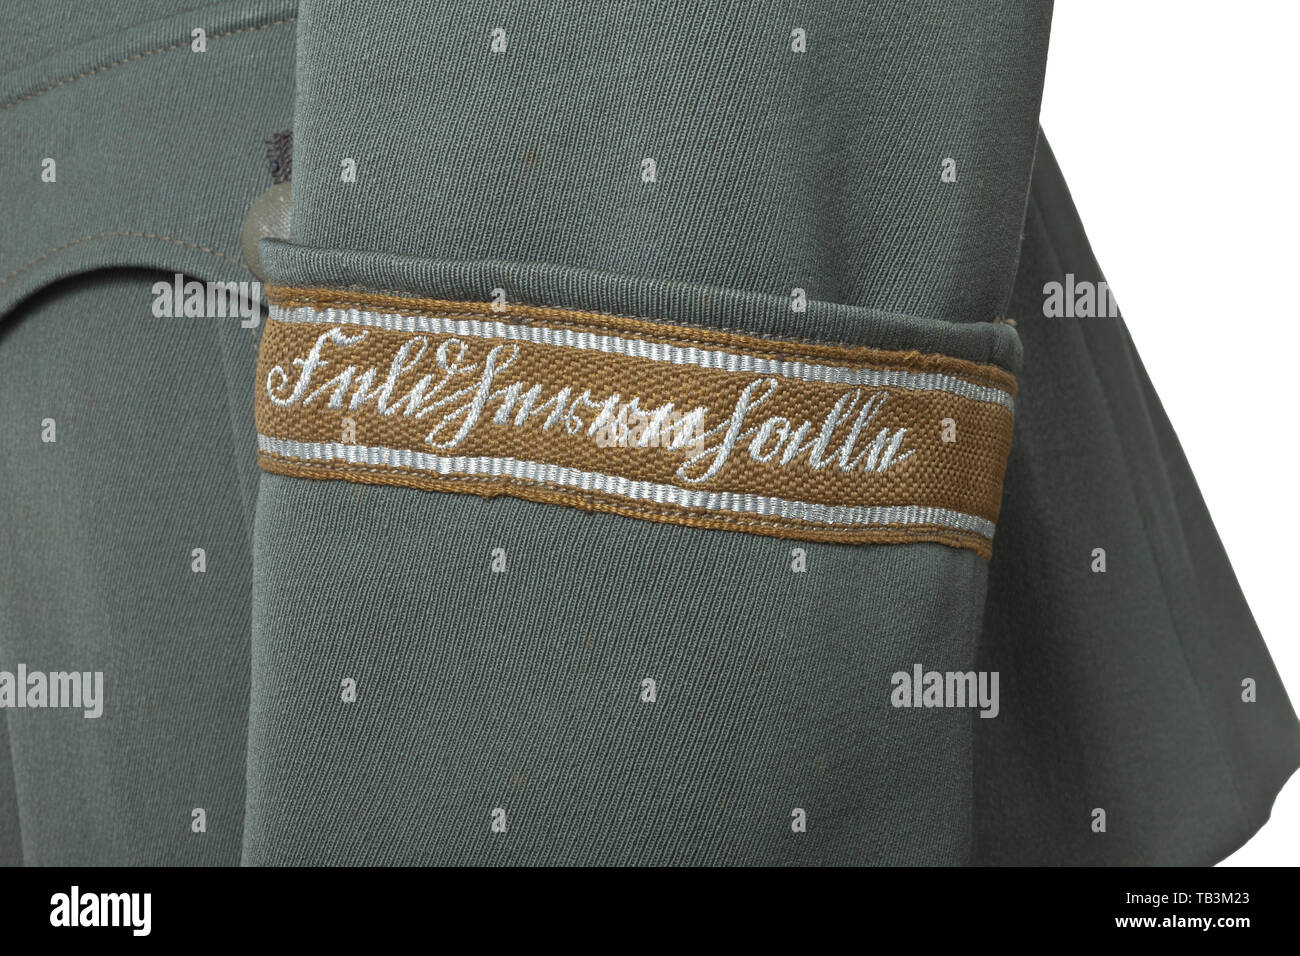 A field tunic of a medical director of the Division "Feldherrnhalle", Private purchase piece made of field-grey gabardine with dark-green collar, field-grey buttons, grey silk lining, hand-embroidered officer's eagle, sewn shoulder boards and collar patches, the left arm with original sewn sleeve band "Feldherrnhalle". The stitching on the left shoulder somewhat loosened (can easily be mended). infantry, military, armed forces, militaria, object, objects, stills, clipping, clippings, cut out, cut-out, cut-outs, historic, historical 20th century, Additional-Rights-Clearance-Info-Not-Available Stock Photo